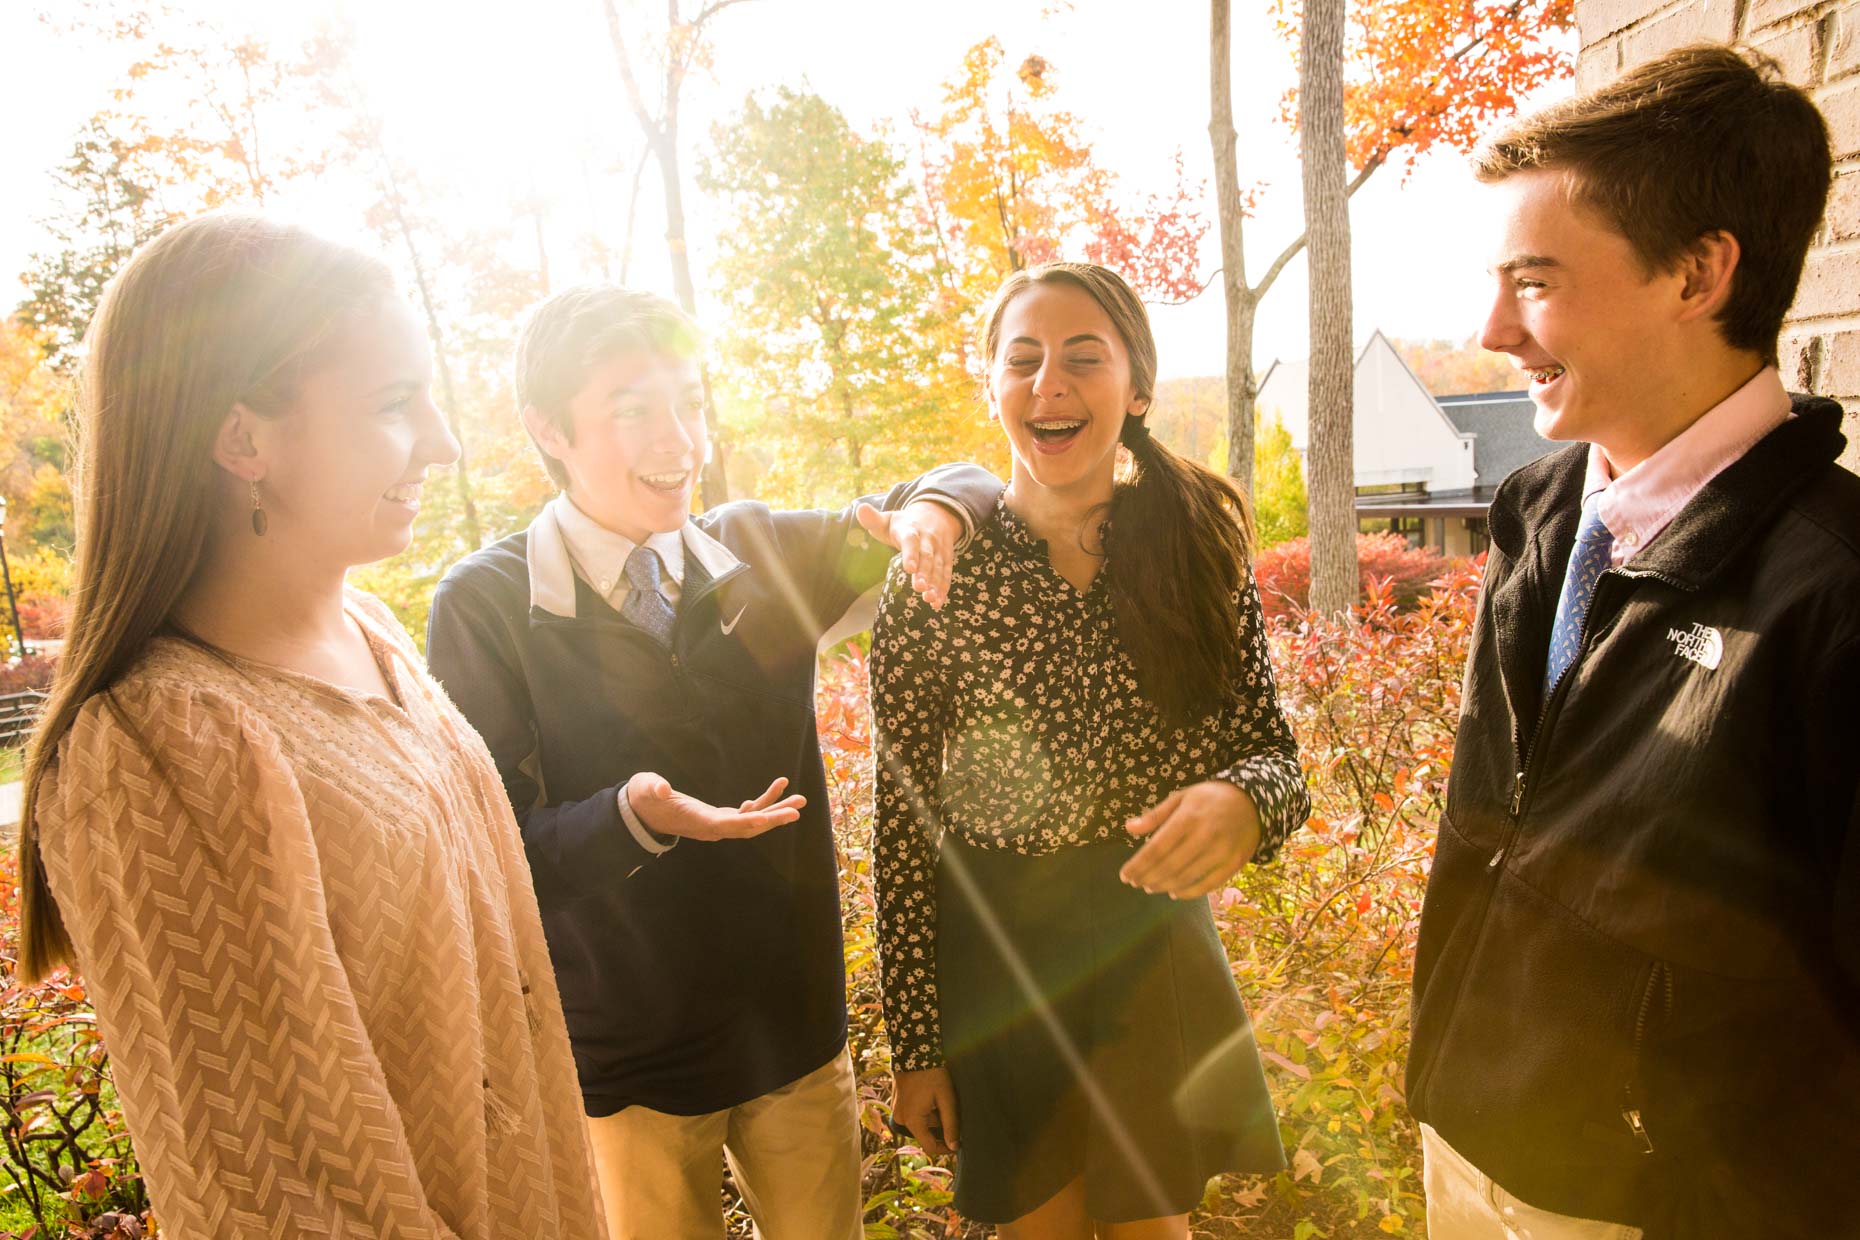 Students laughing outside with sun flare